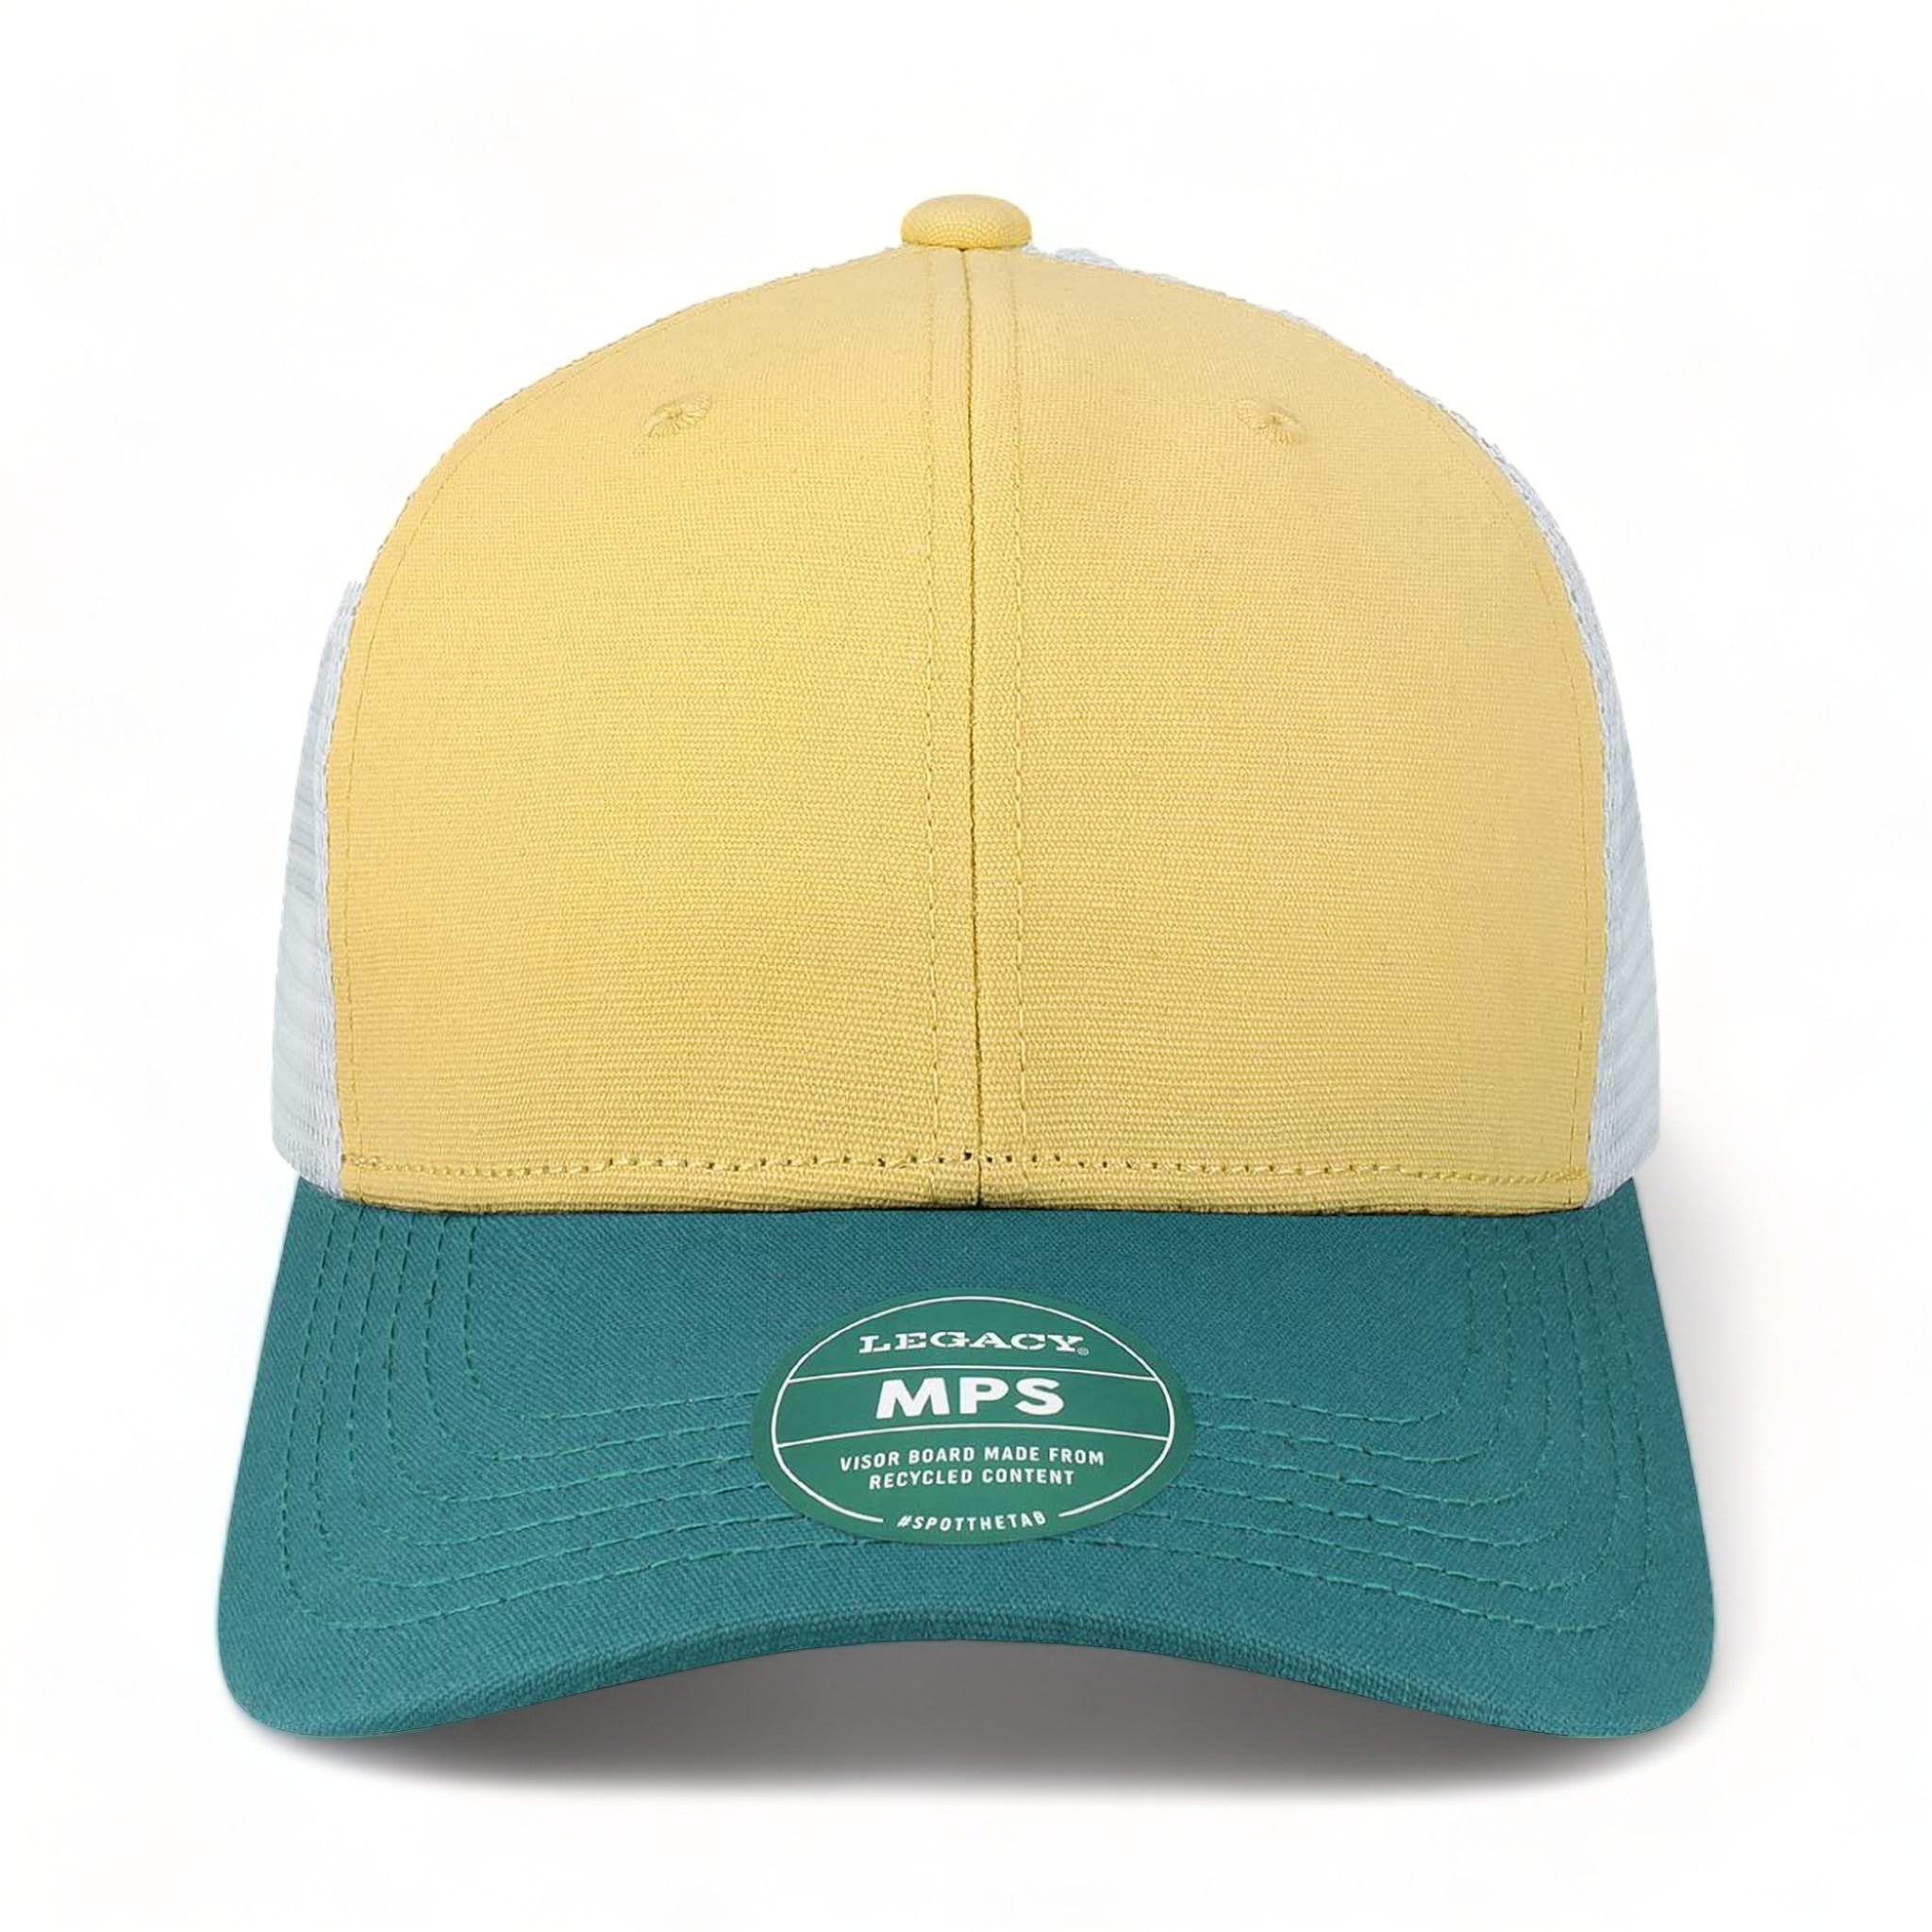 Front view of LEGACY MPS custom hat in yellow, marine and white